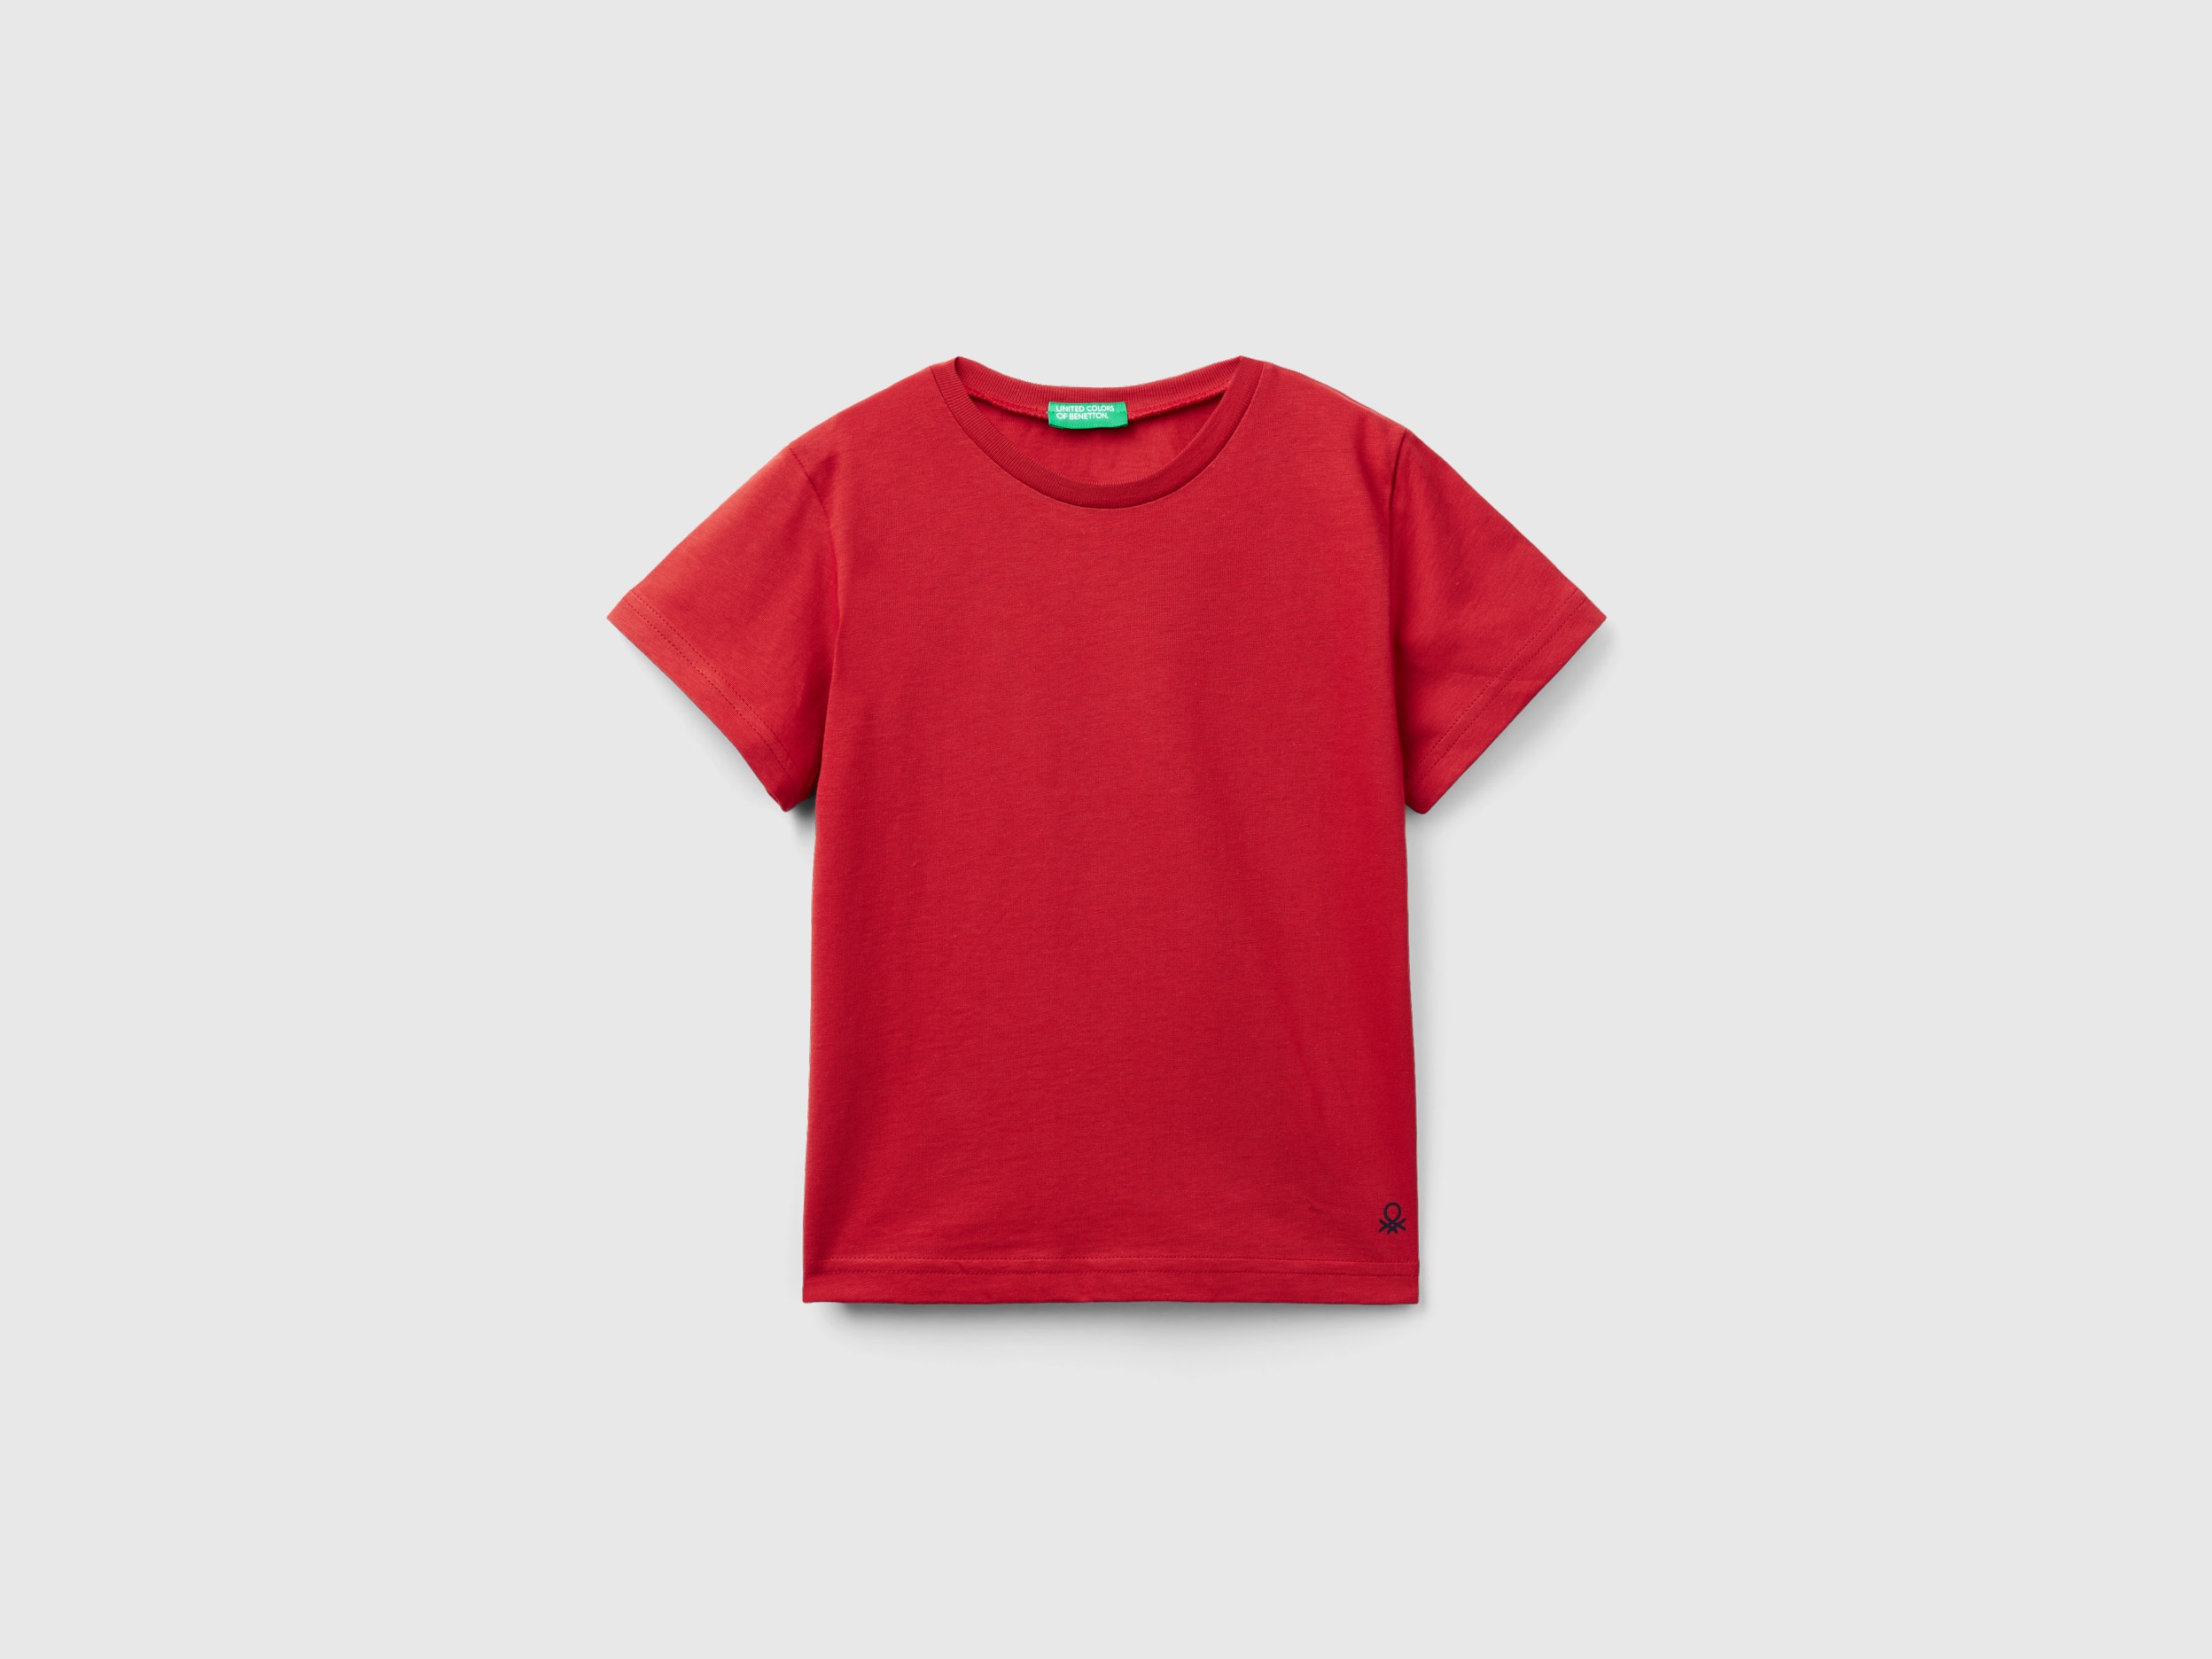 Image of Benetton, T-shirt In Organic Cotton, size 90, Brick Red, Kids